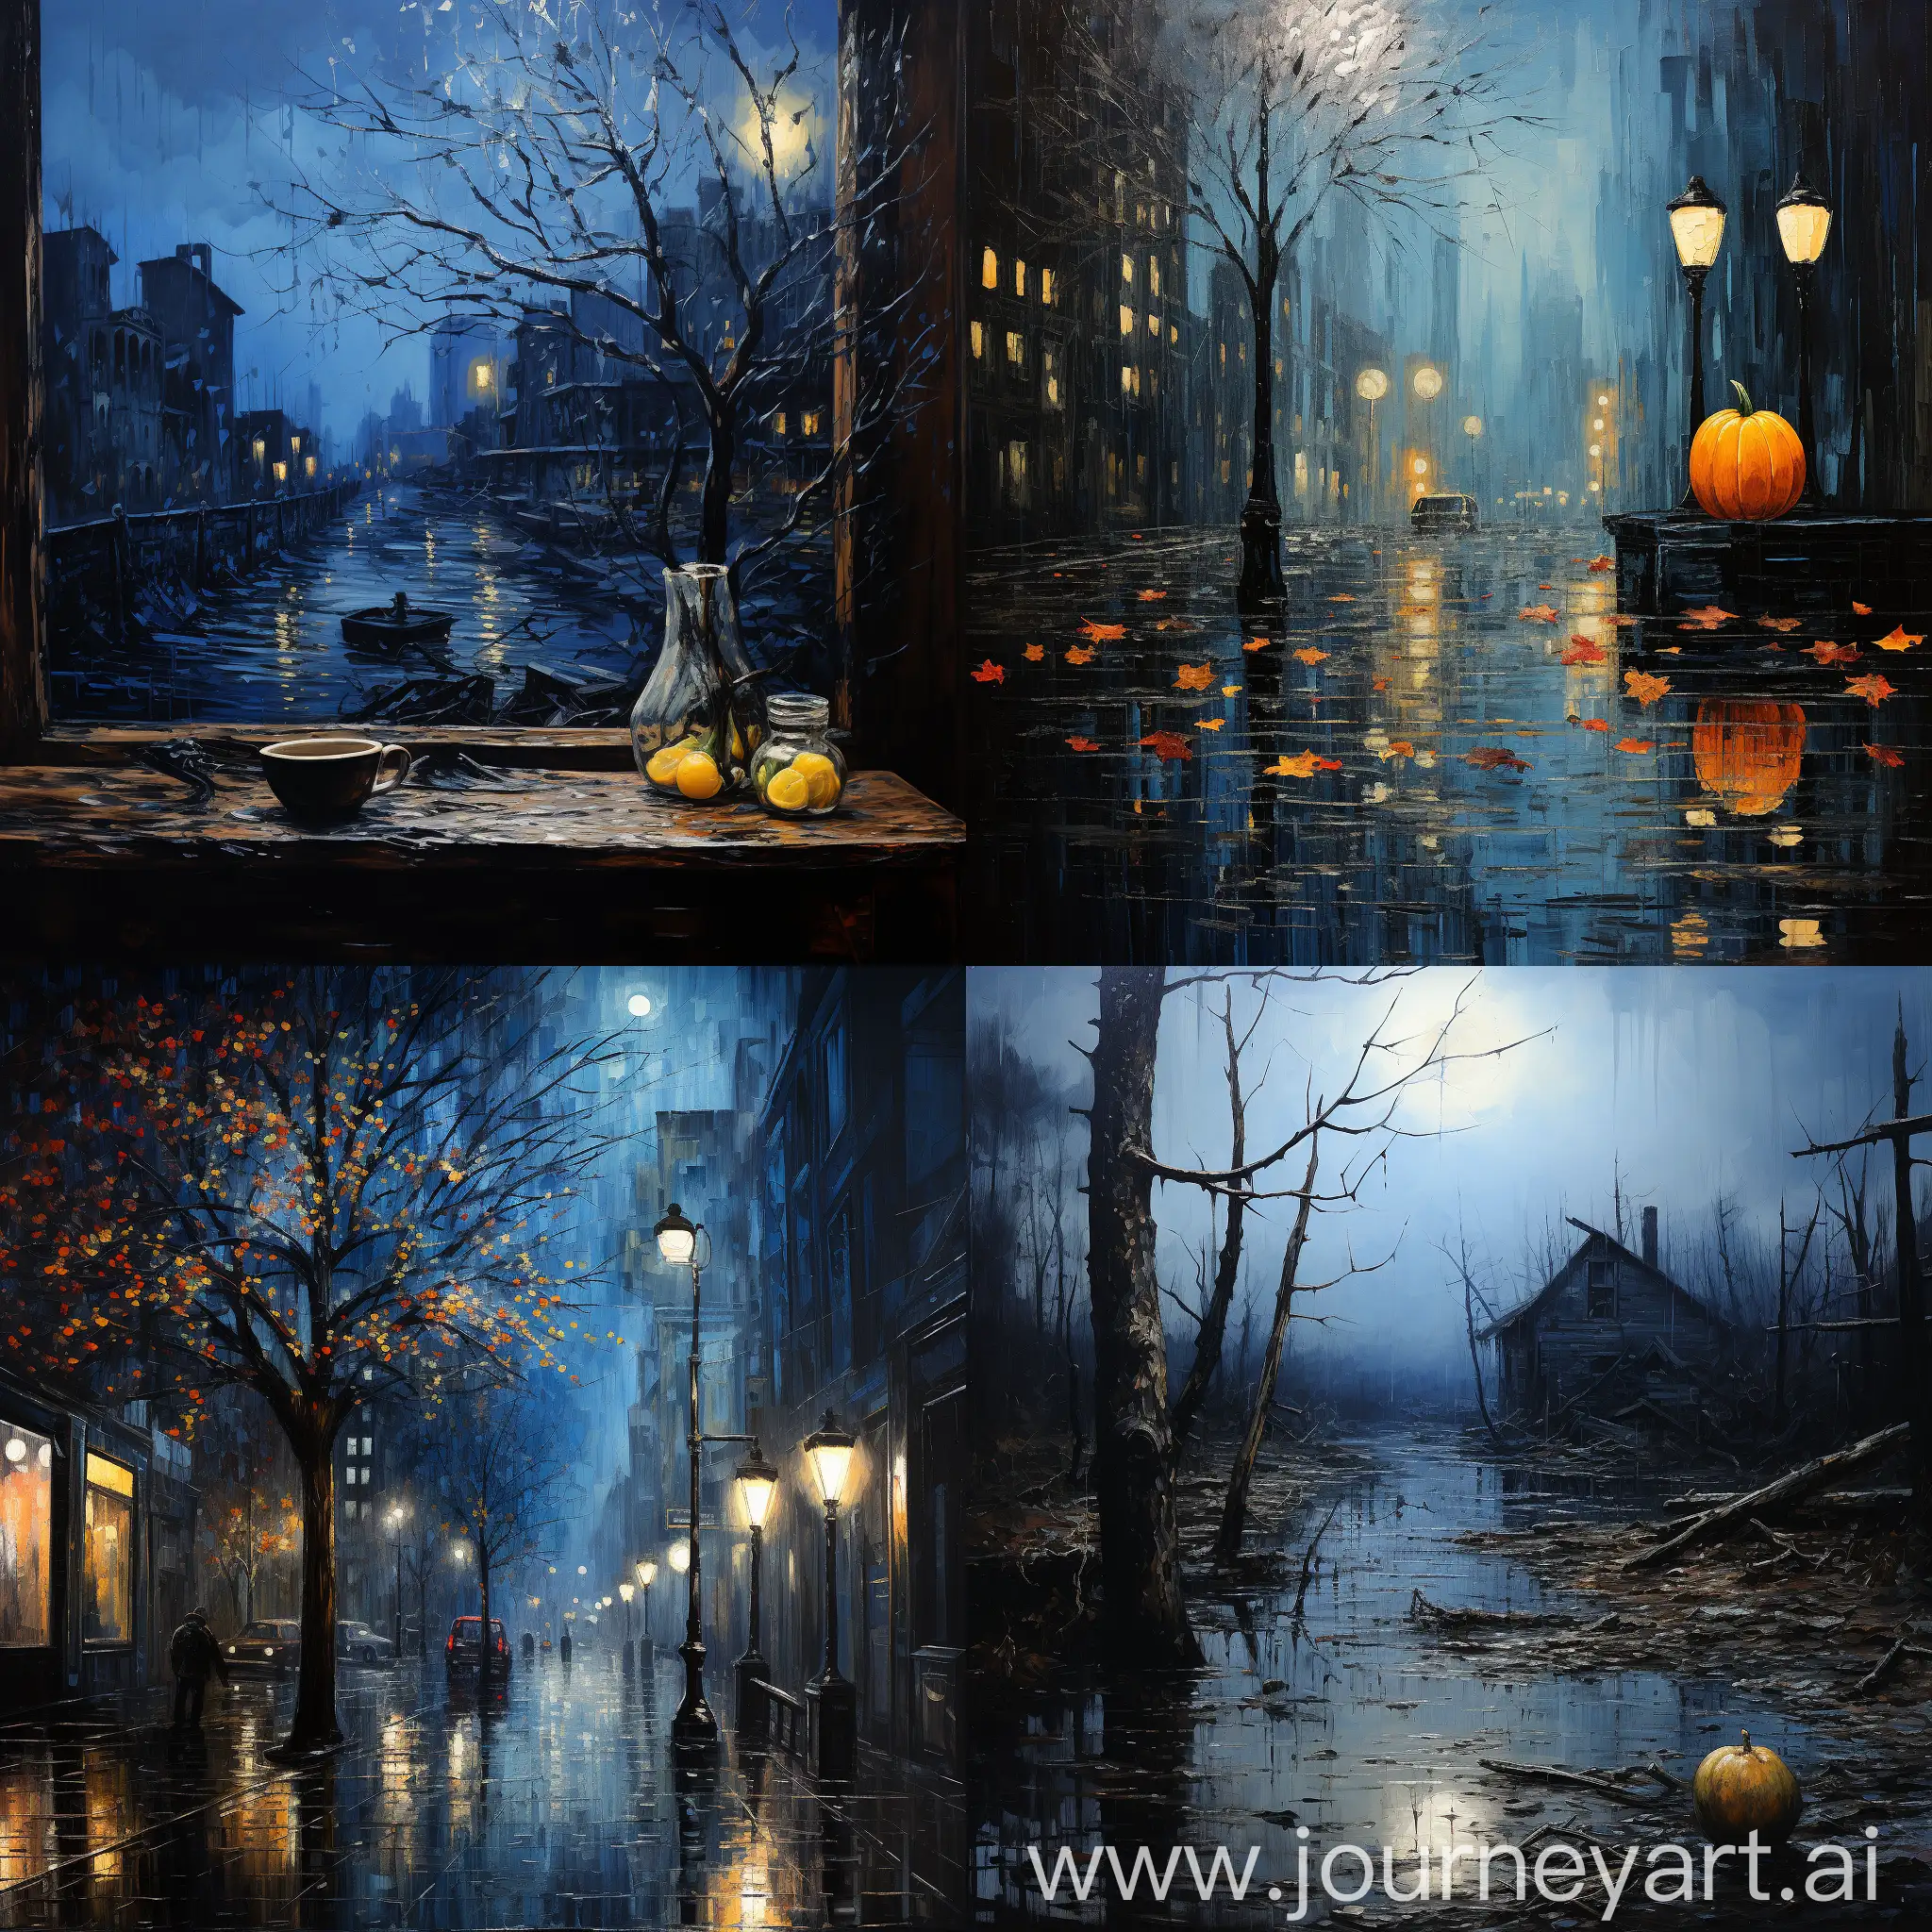 Rainy-Night-in-New-York-City-Vintage-Vincent-Van-Gogh-Inspired-Oil-Painting-of-Blue-Blackberry-Fruit